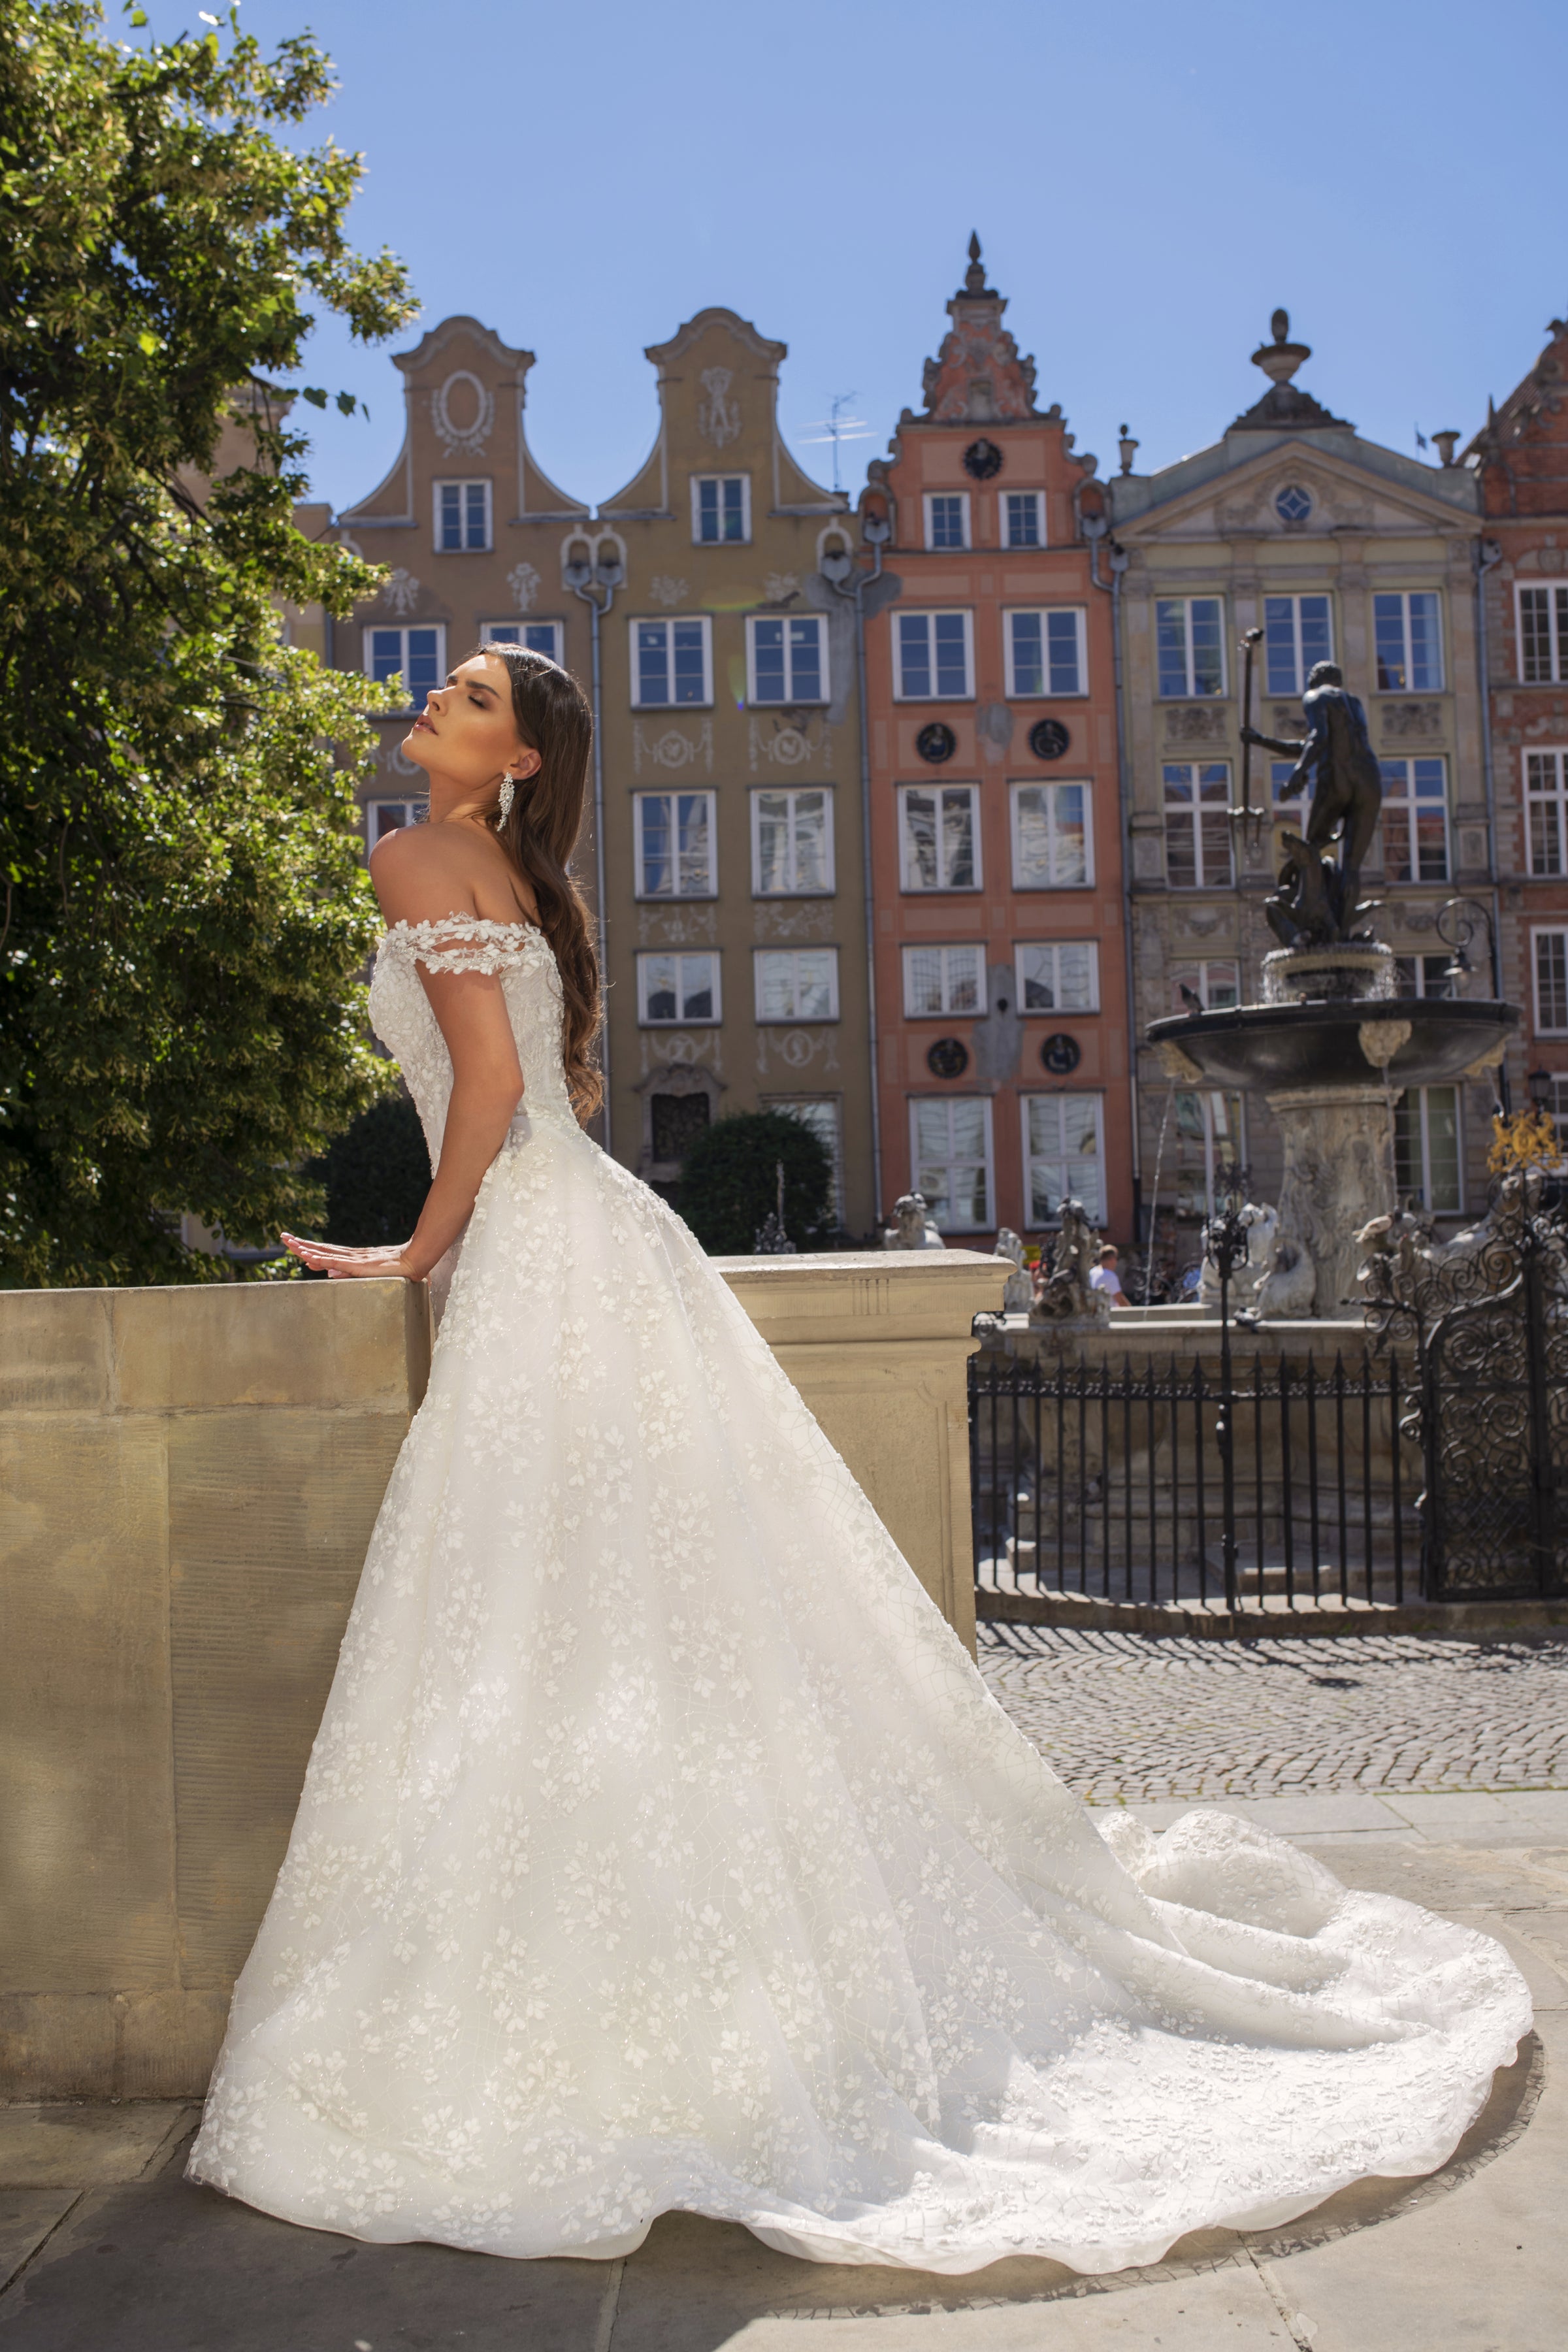 CRAFTING UNFORGETTABLE MOMENTS WITH CUSTOM-MADE WEDDING GOWNS